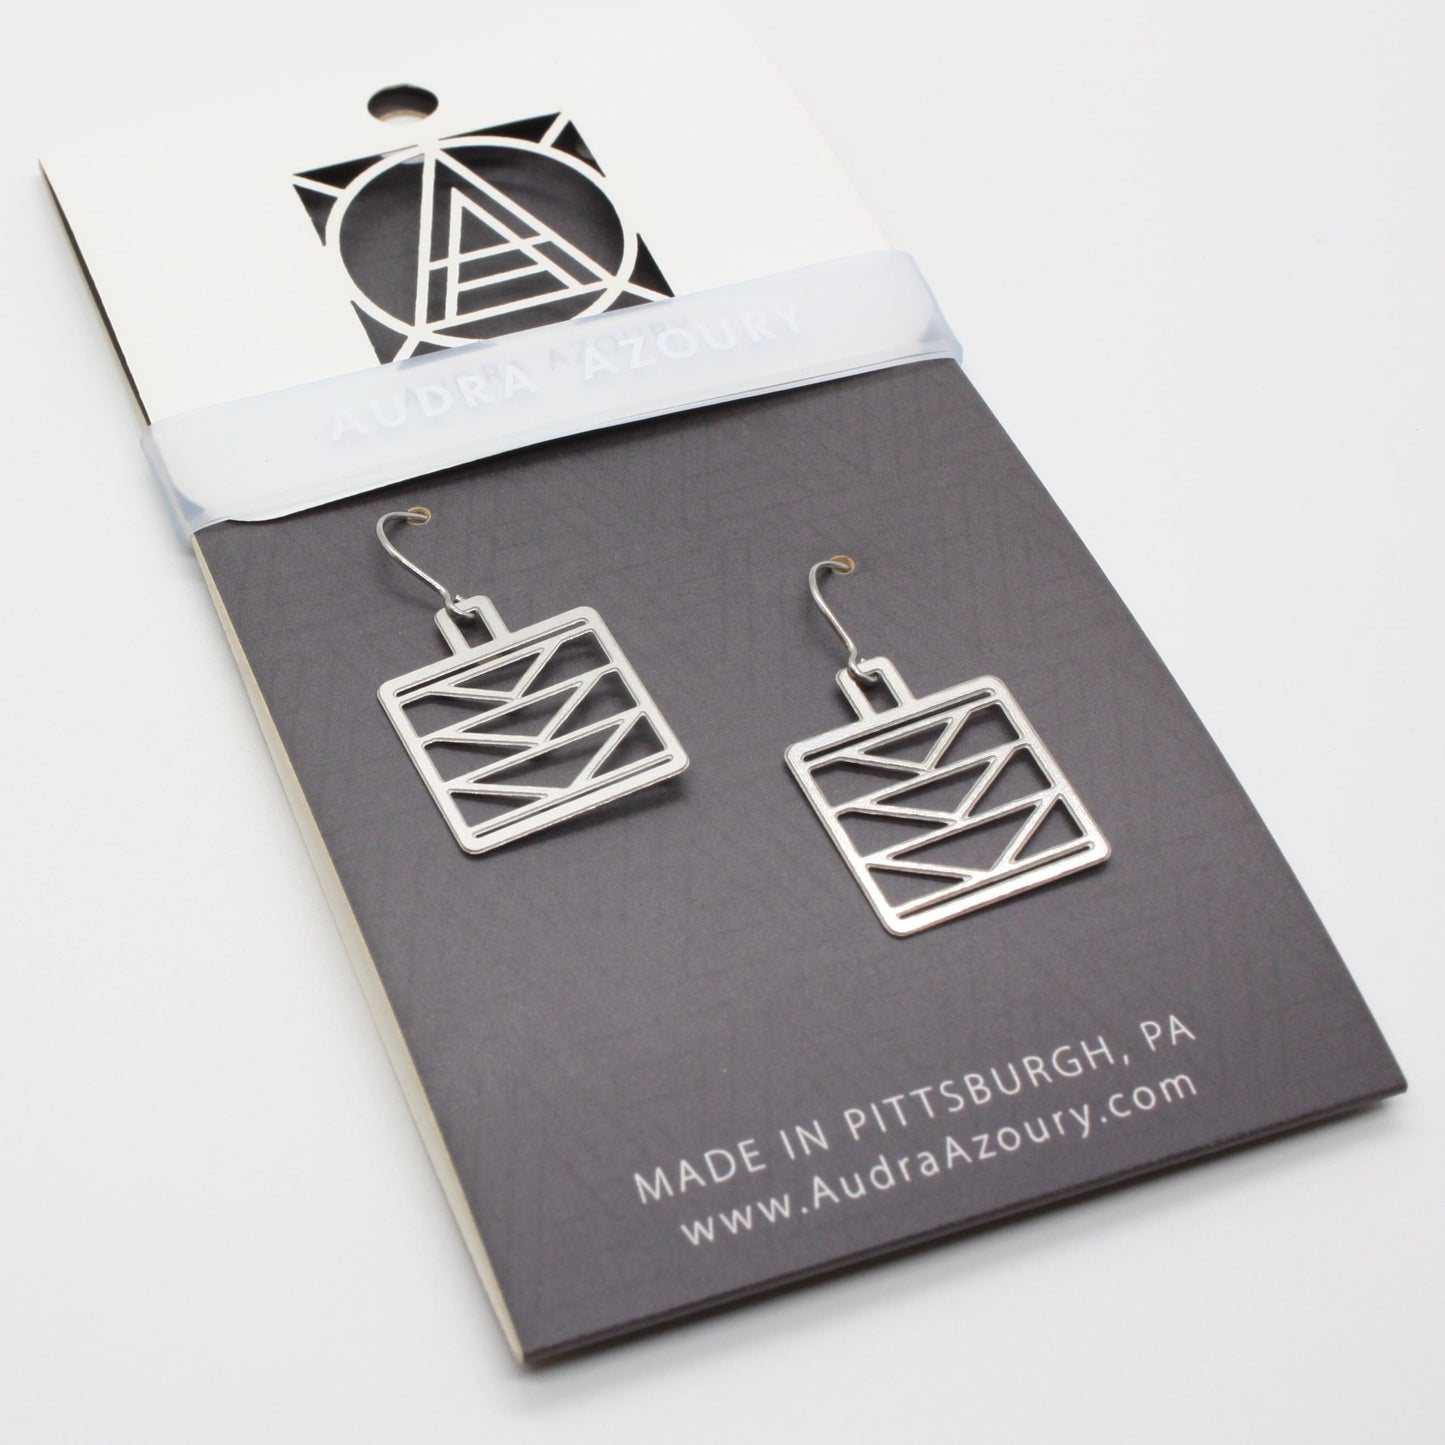 Square Tri-Tower Earrings